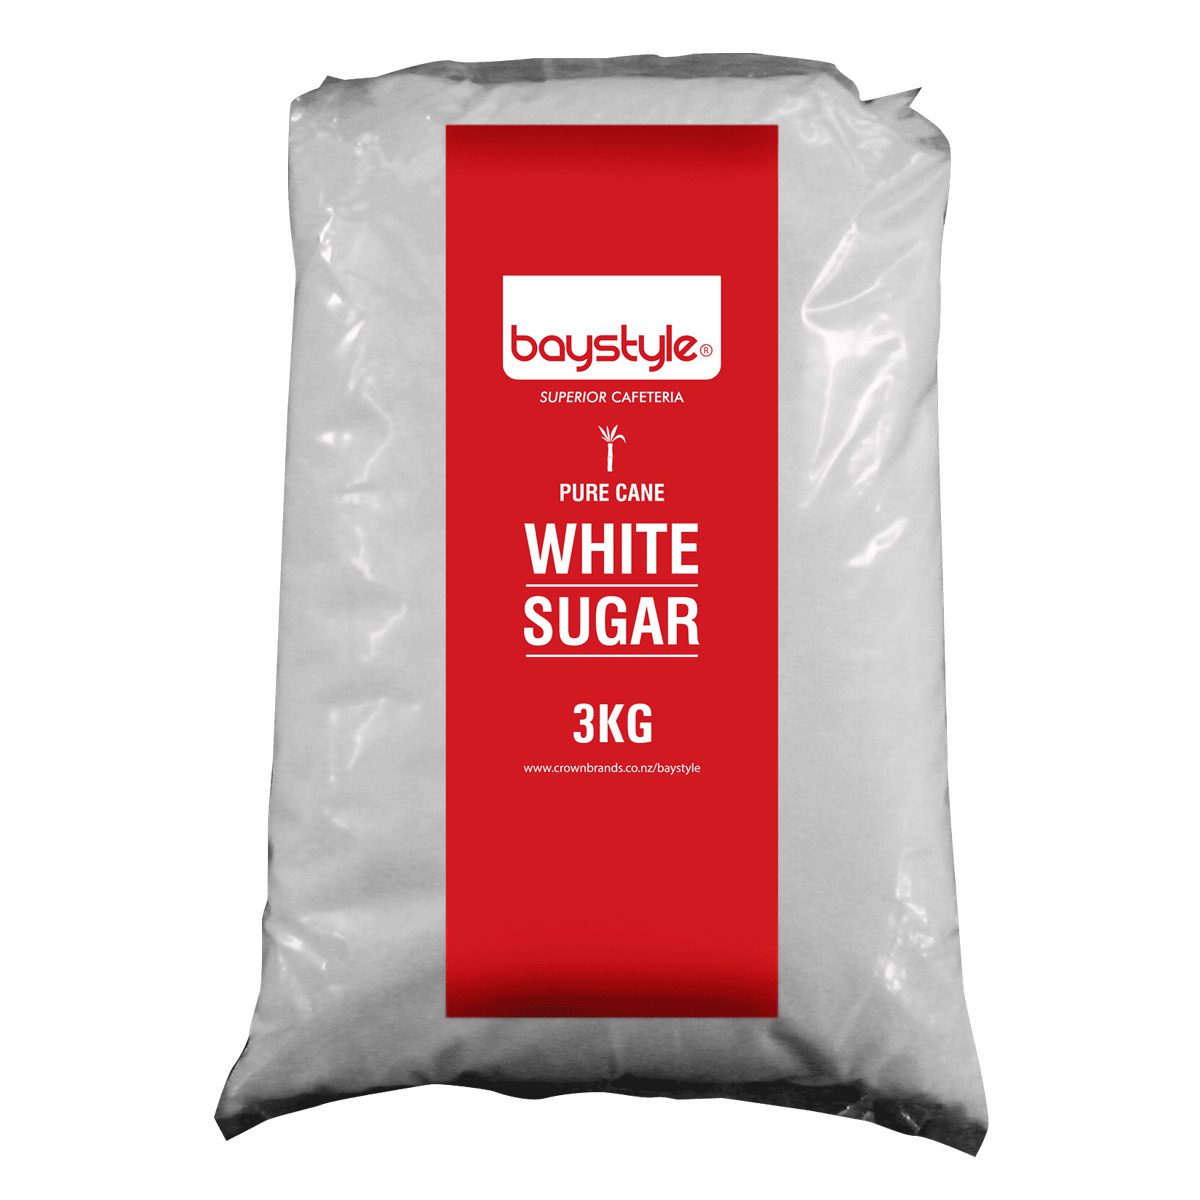 consumables-hospitality-beverage-food-baystyle-white-sugar-3kg-refined-cane-sugar-minimal-moisture-content-quality-a-grade-white-sugar-packed-in-superior-high-micron-laminate-film-vjs-distributors-SUG